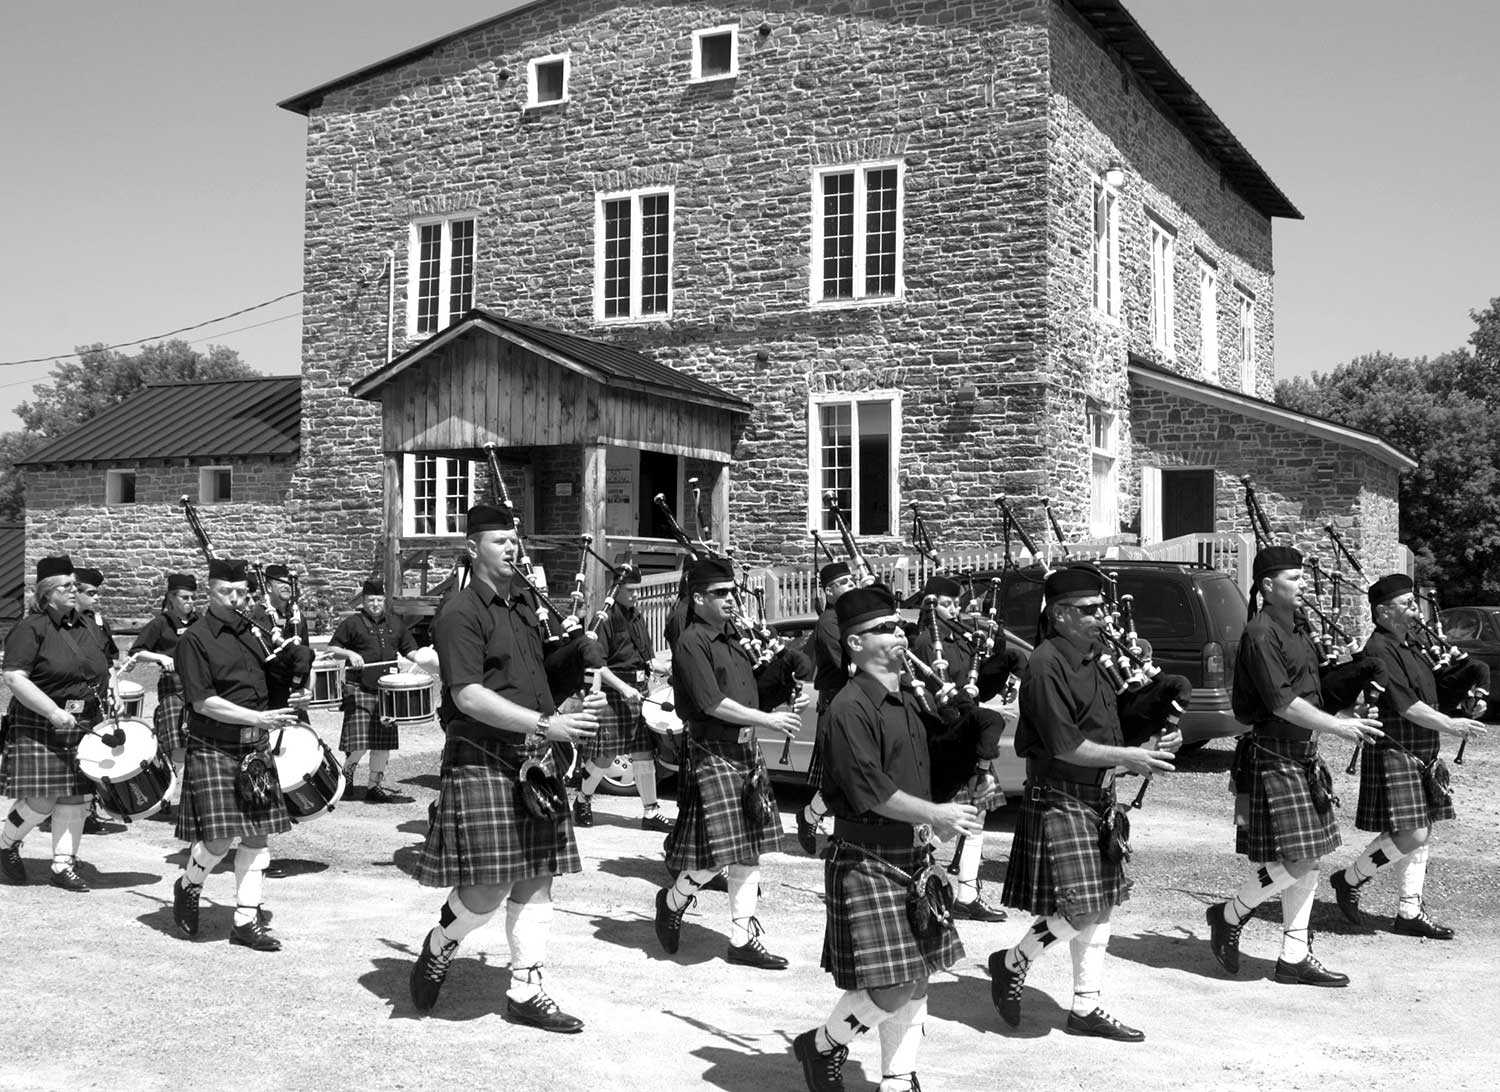 Parading into the Spencerville Mill grounds is the Glengarry Pipe Band (Photo: The Spencerville Mill Foundation)